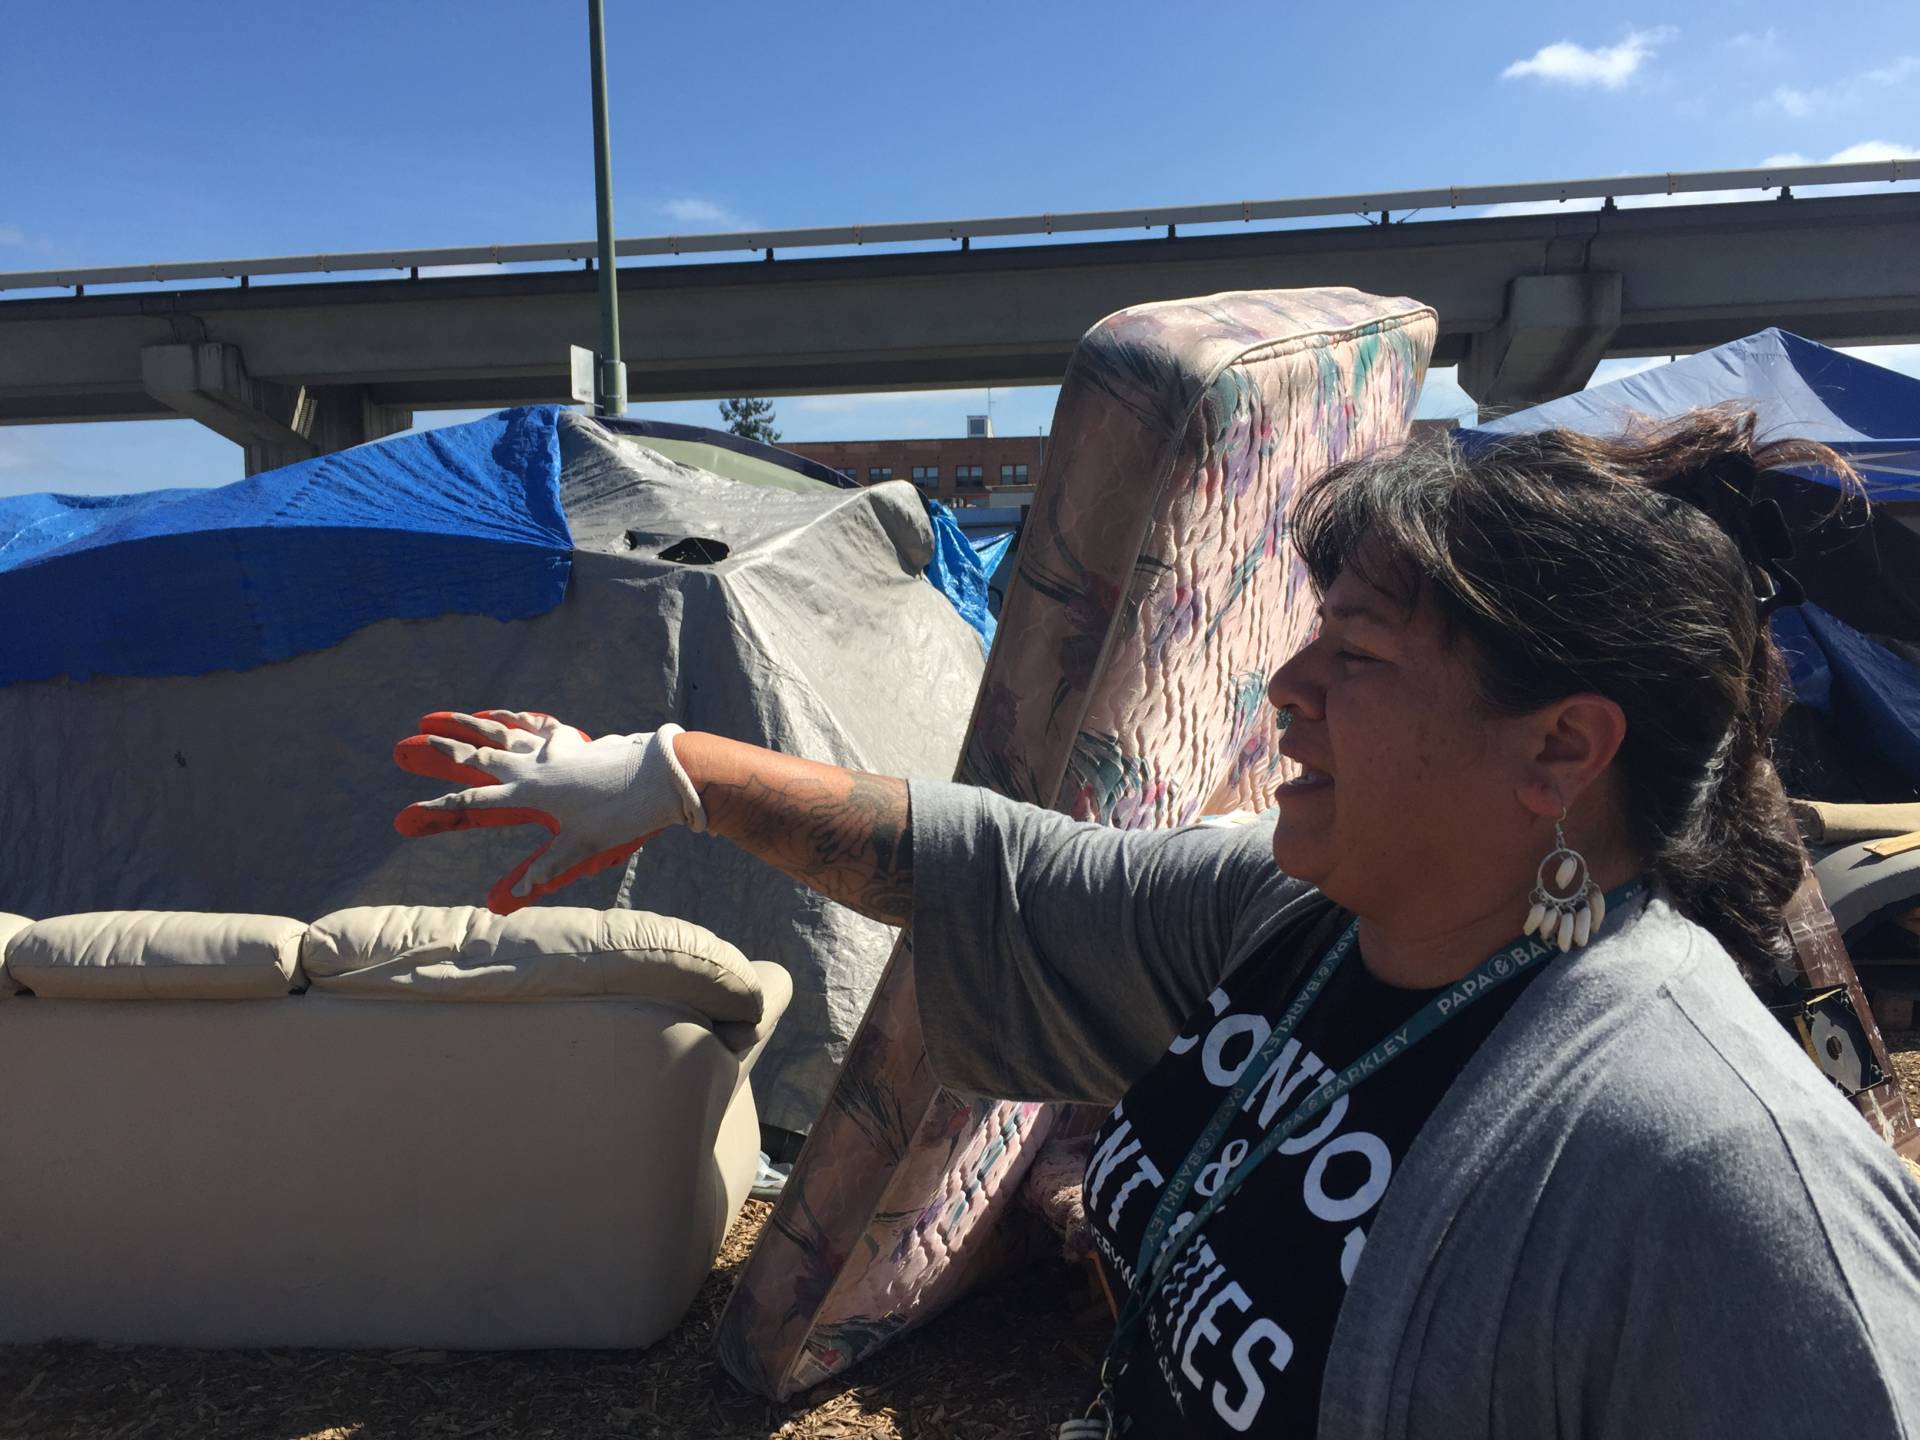 Needa Bee, lead organizer for The Village, at an East Oakland encampment this past summer.  Tara Siler/KQED